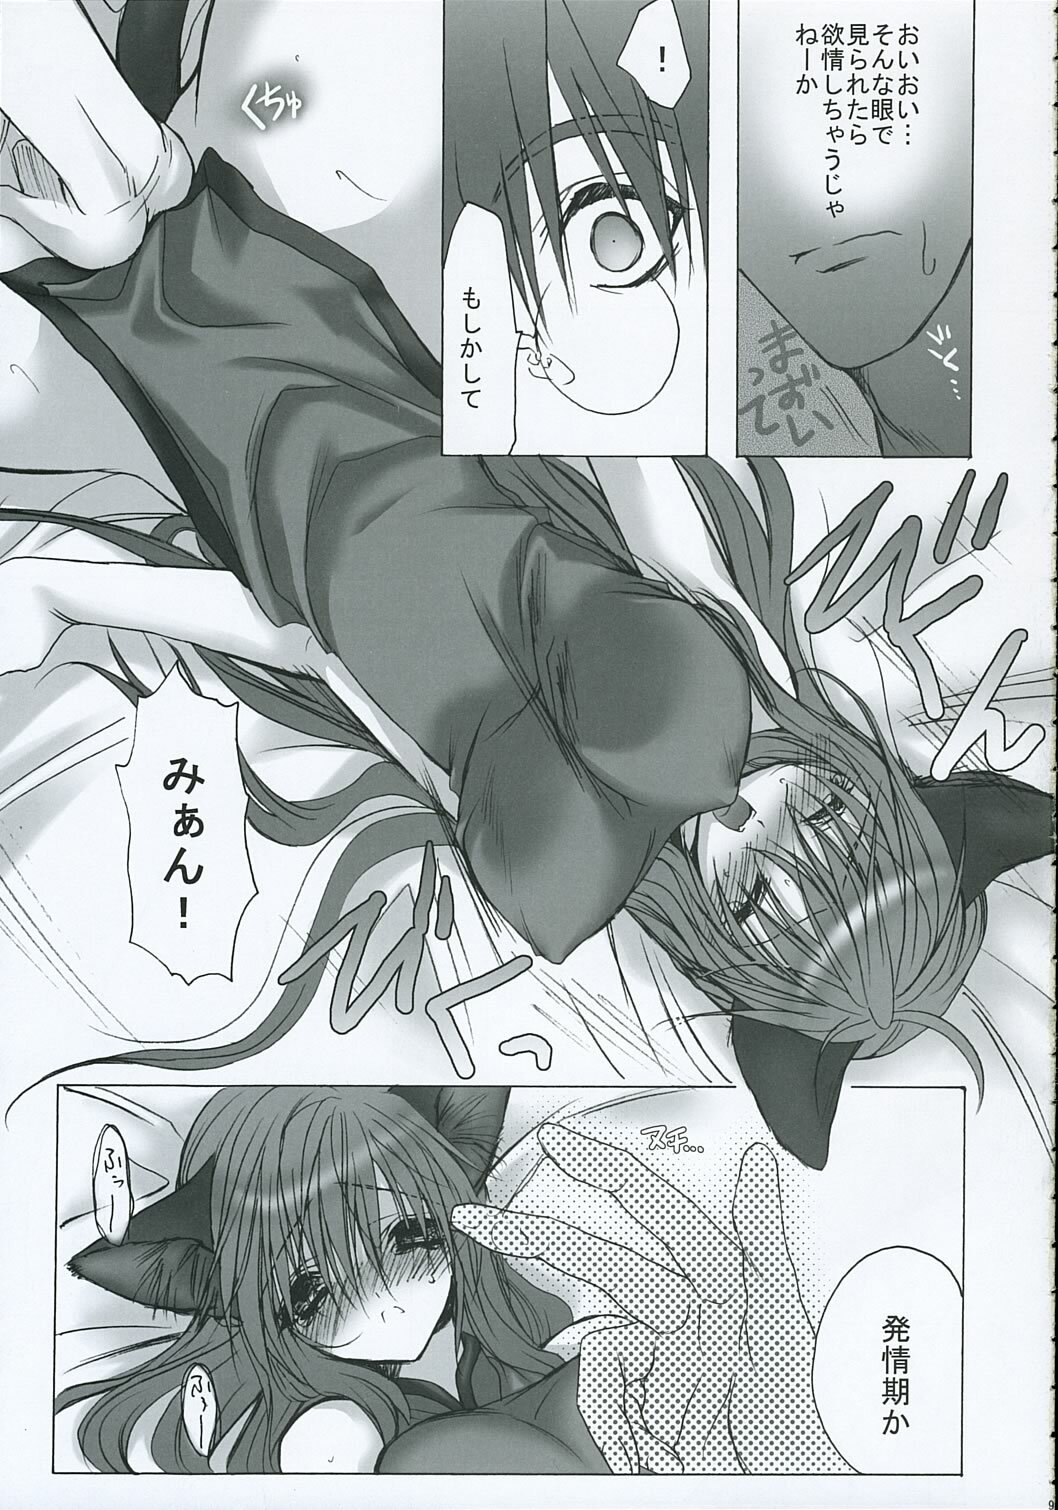 [Saihate no Maria] DANGER ZONE (Guilty Gear XX) page 8 full